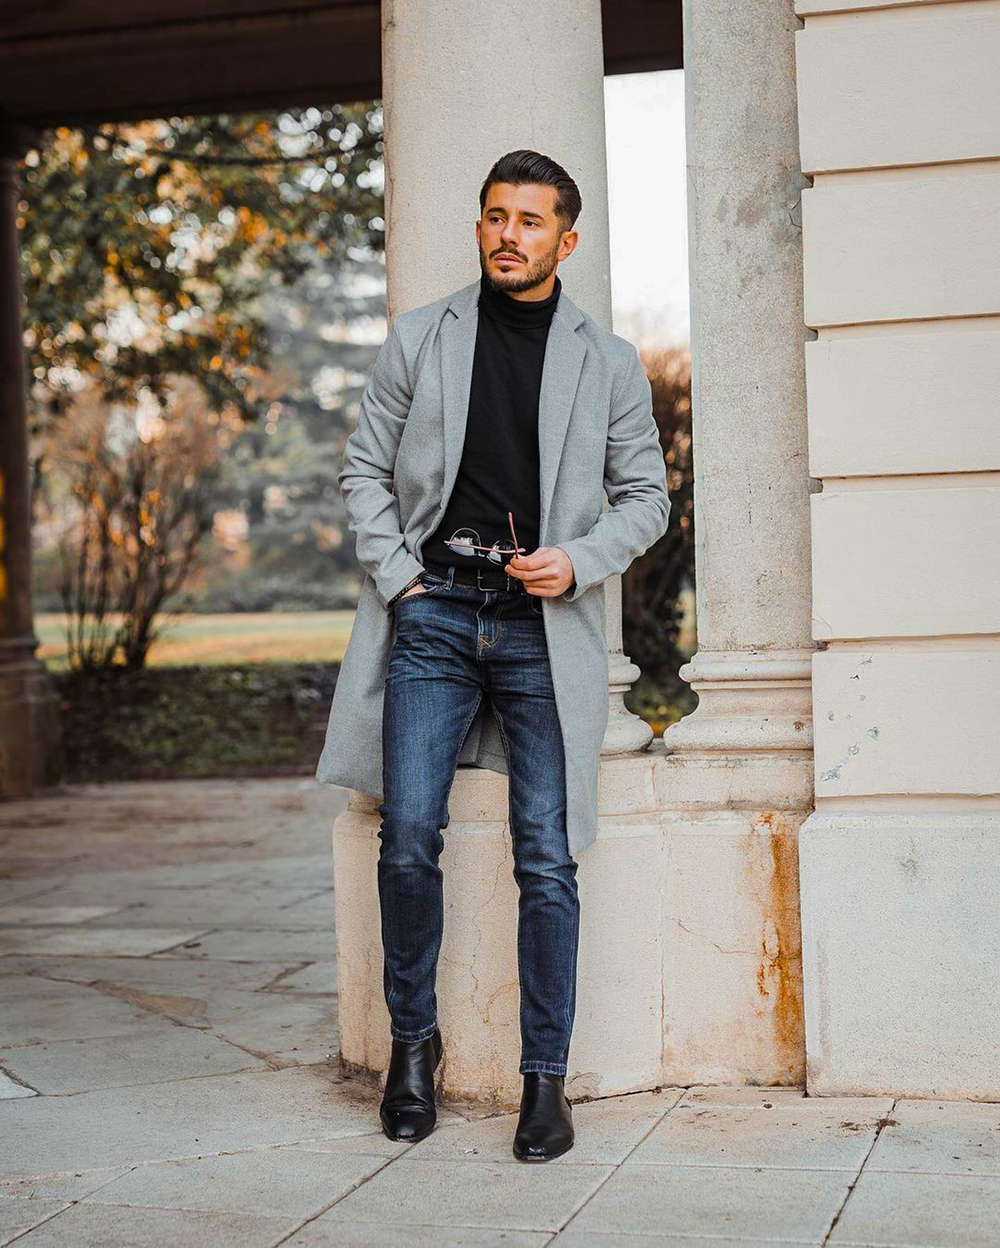 Gray overcoat, black turtleneck, navy denim jeans, and black Chelsea boots outfit